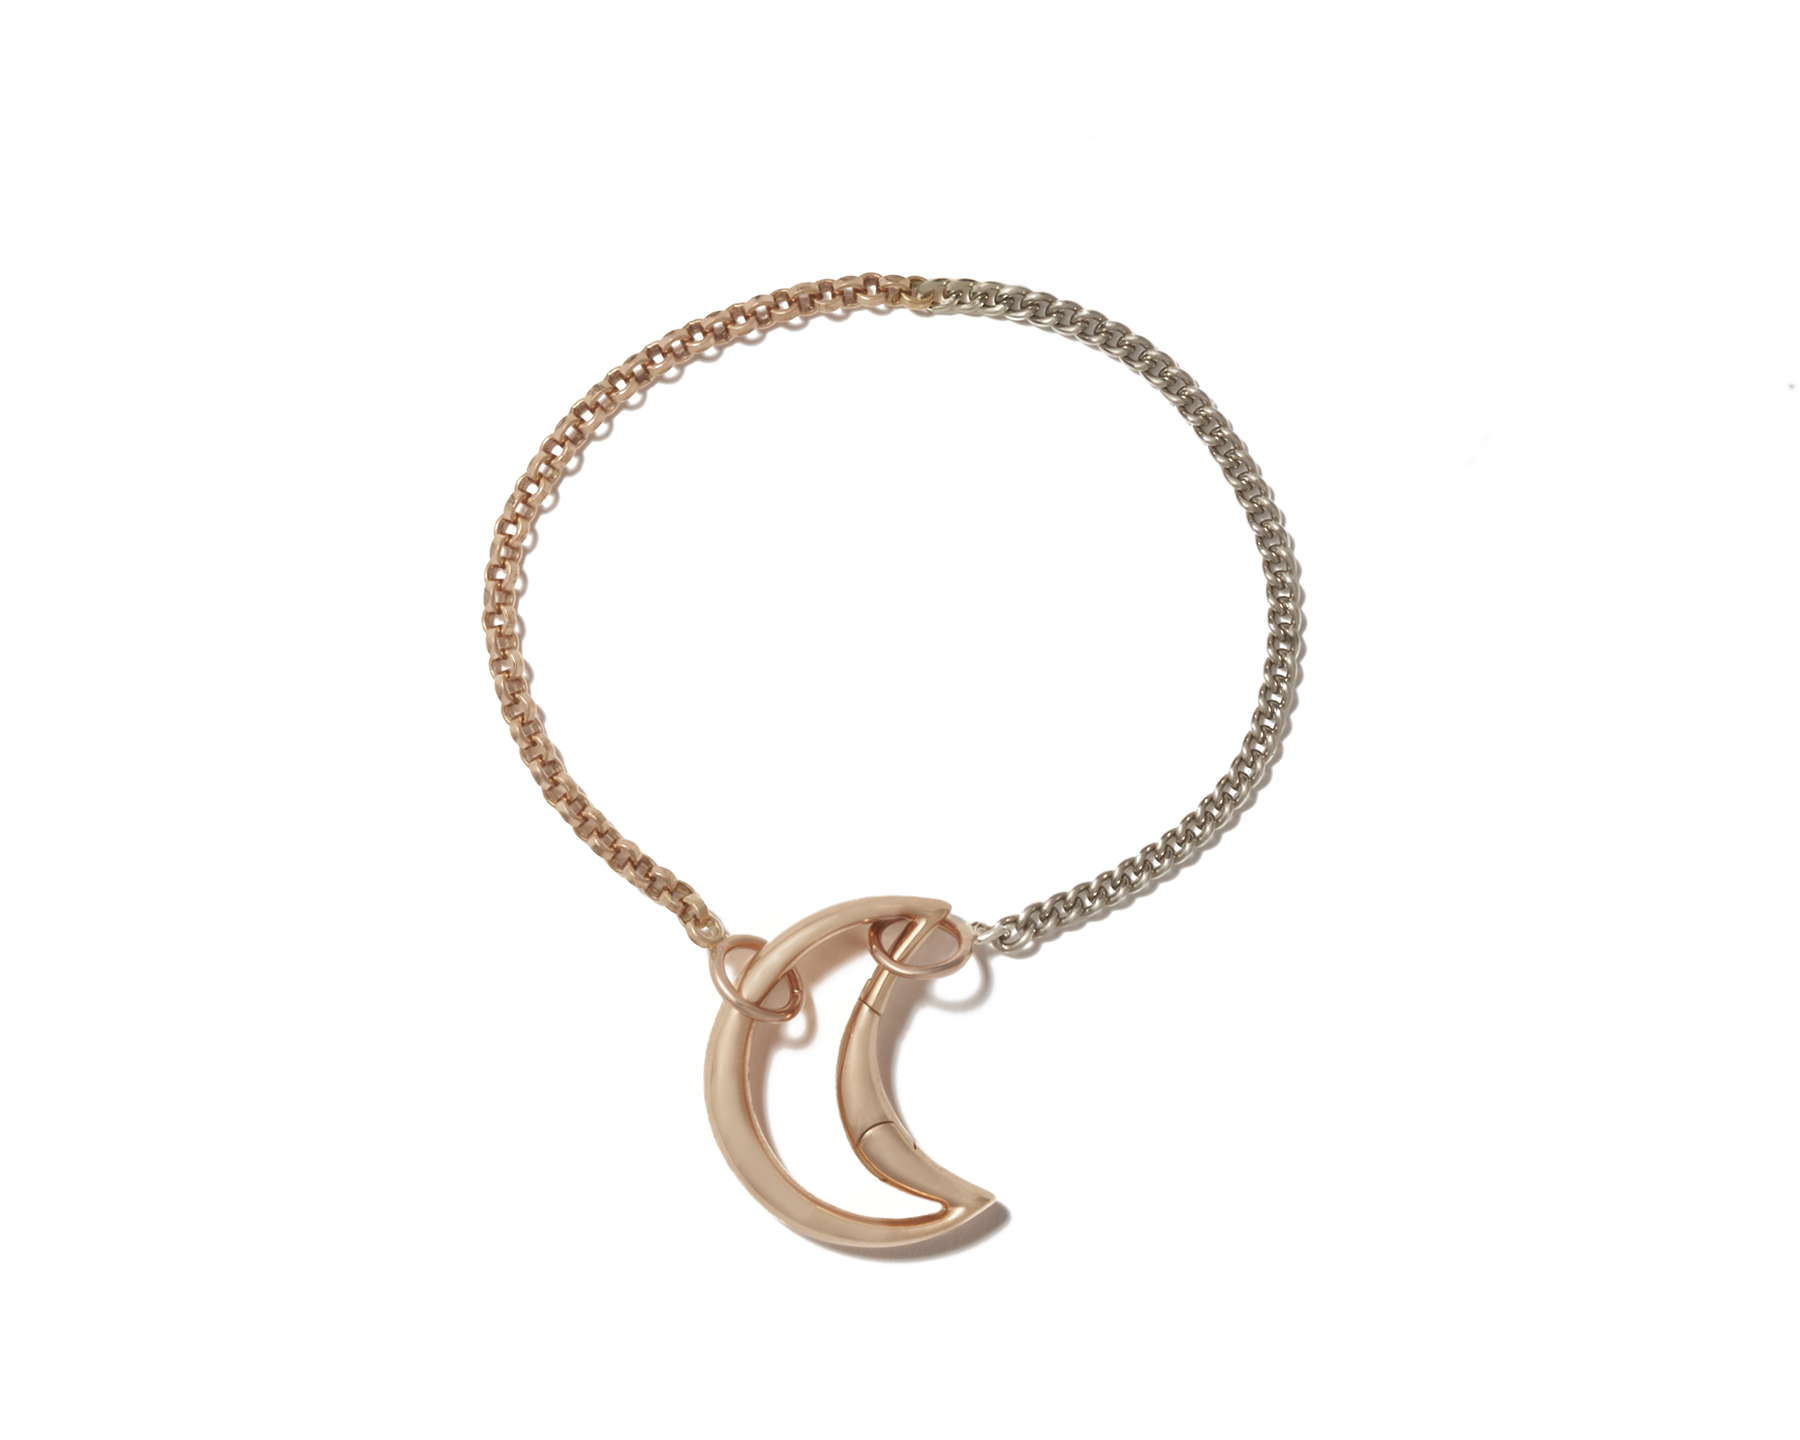 Silver and gold chain bracelet with moon charm